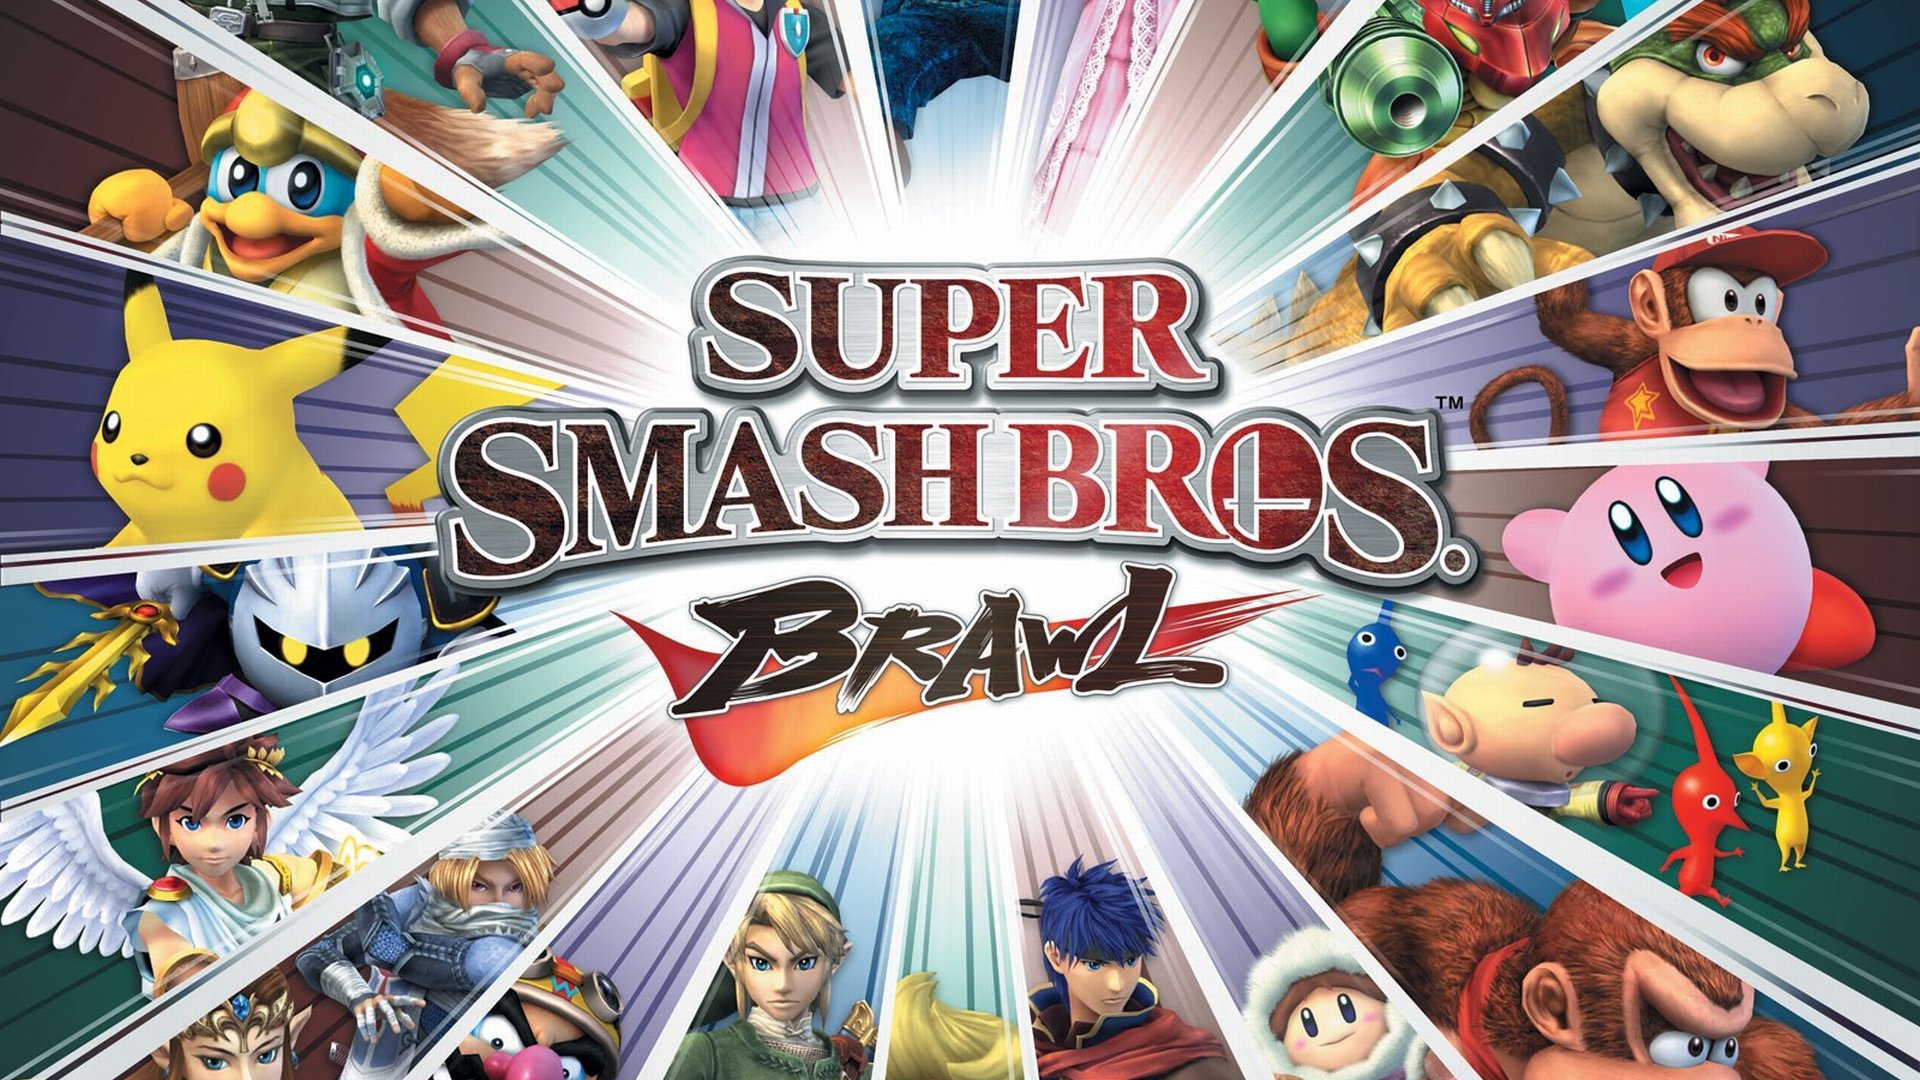 Awesome Super Smash Bros. Brawl free wallpaper ID:118481 for full hd computer